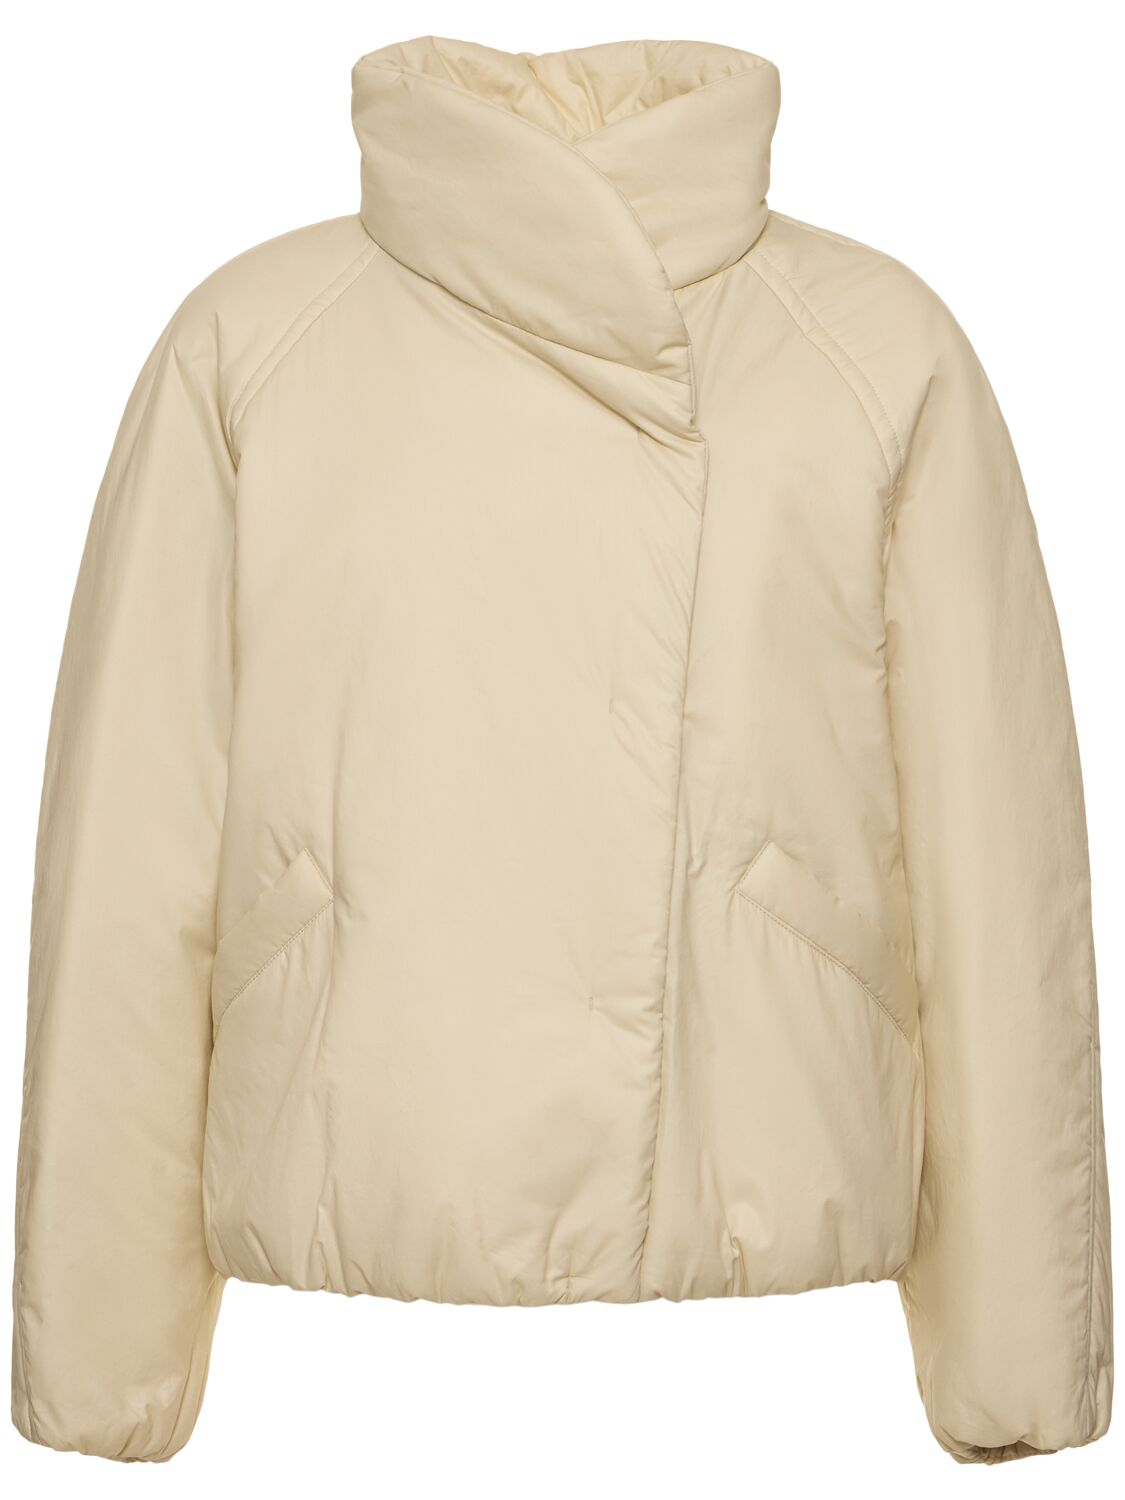 Image of Dylany Cotton Blend Jacket